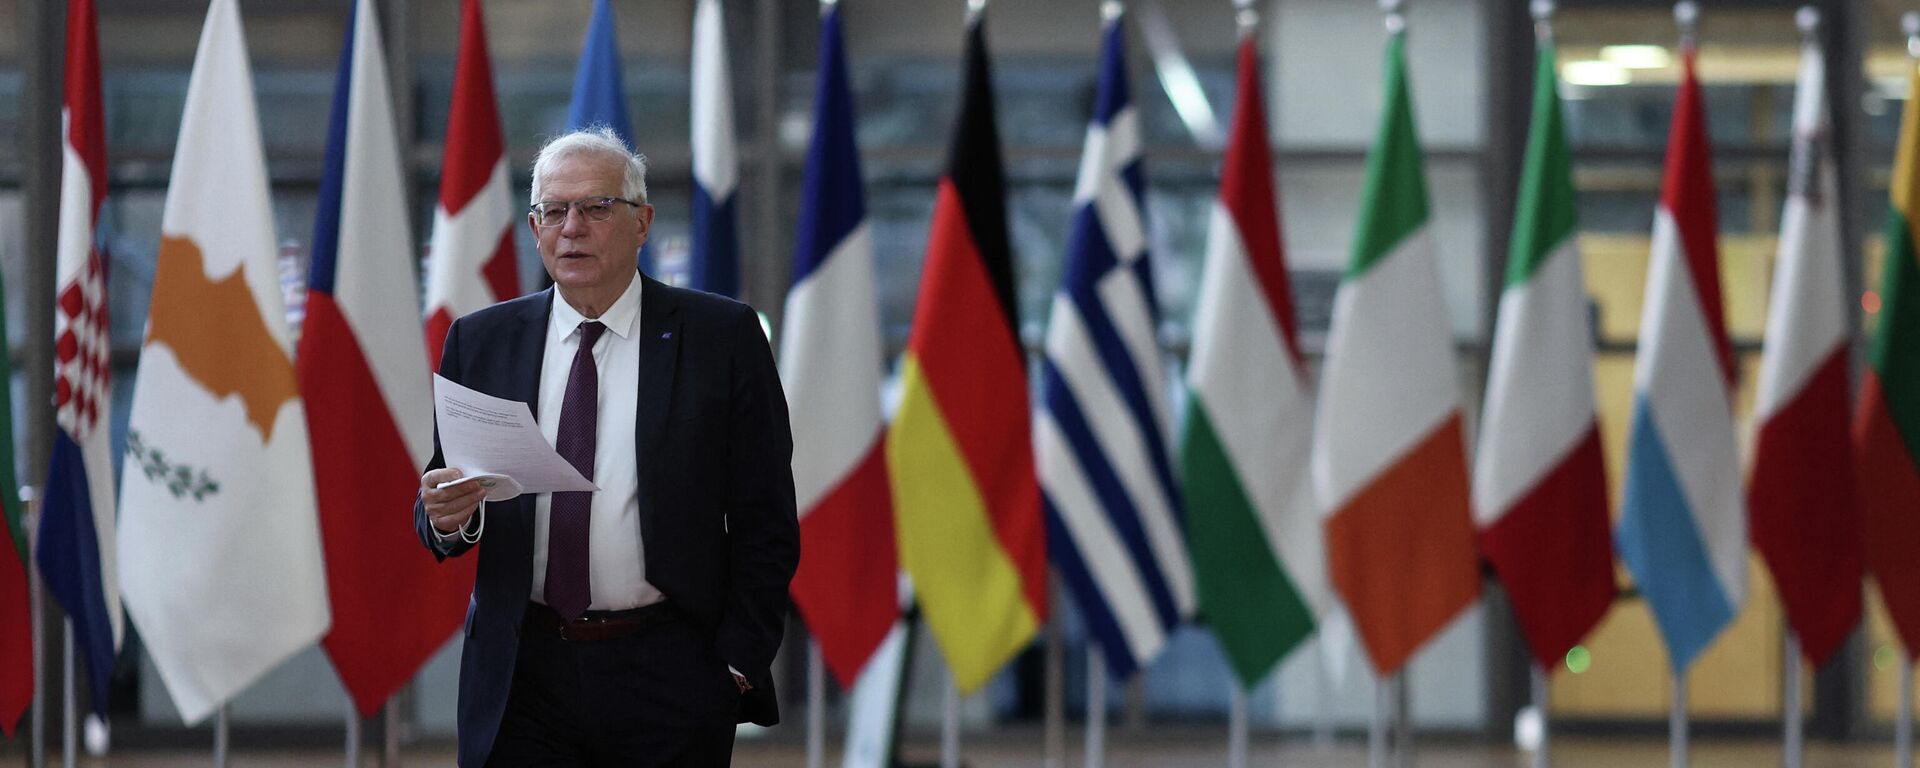 European Union High Representative for Foreign Affairs and Security Policy Josep Borrell arrives for a Foreign Affairs Council meeting at the EU headquarters in Brussels on February 21, 2022.  - Sputnik International, 1920, 21.11.2022